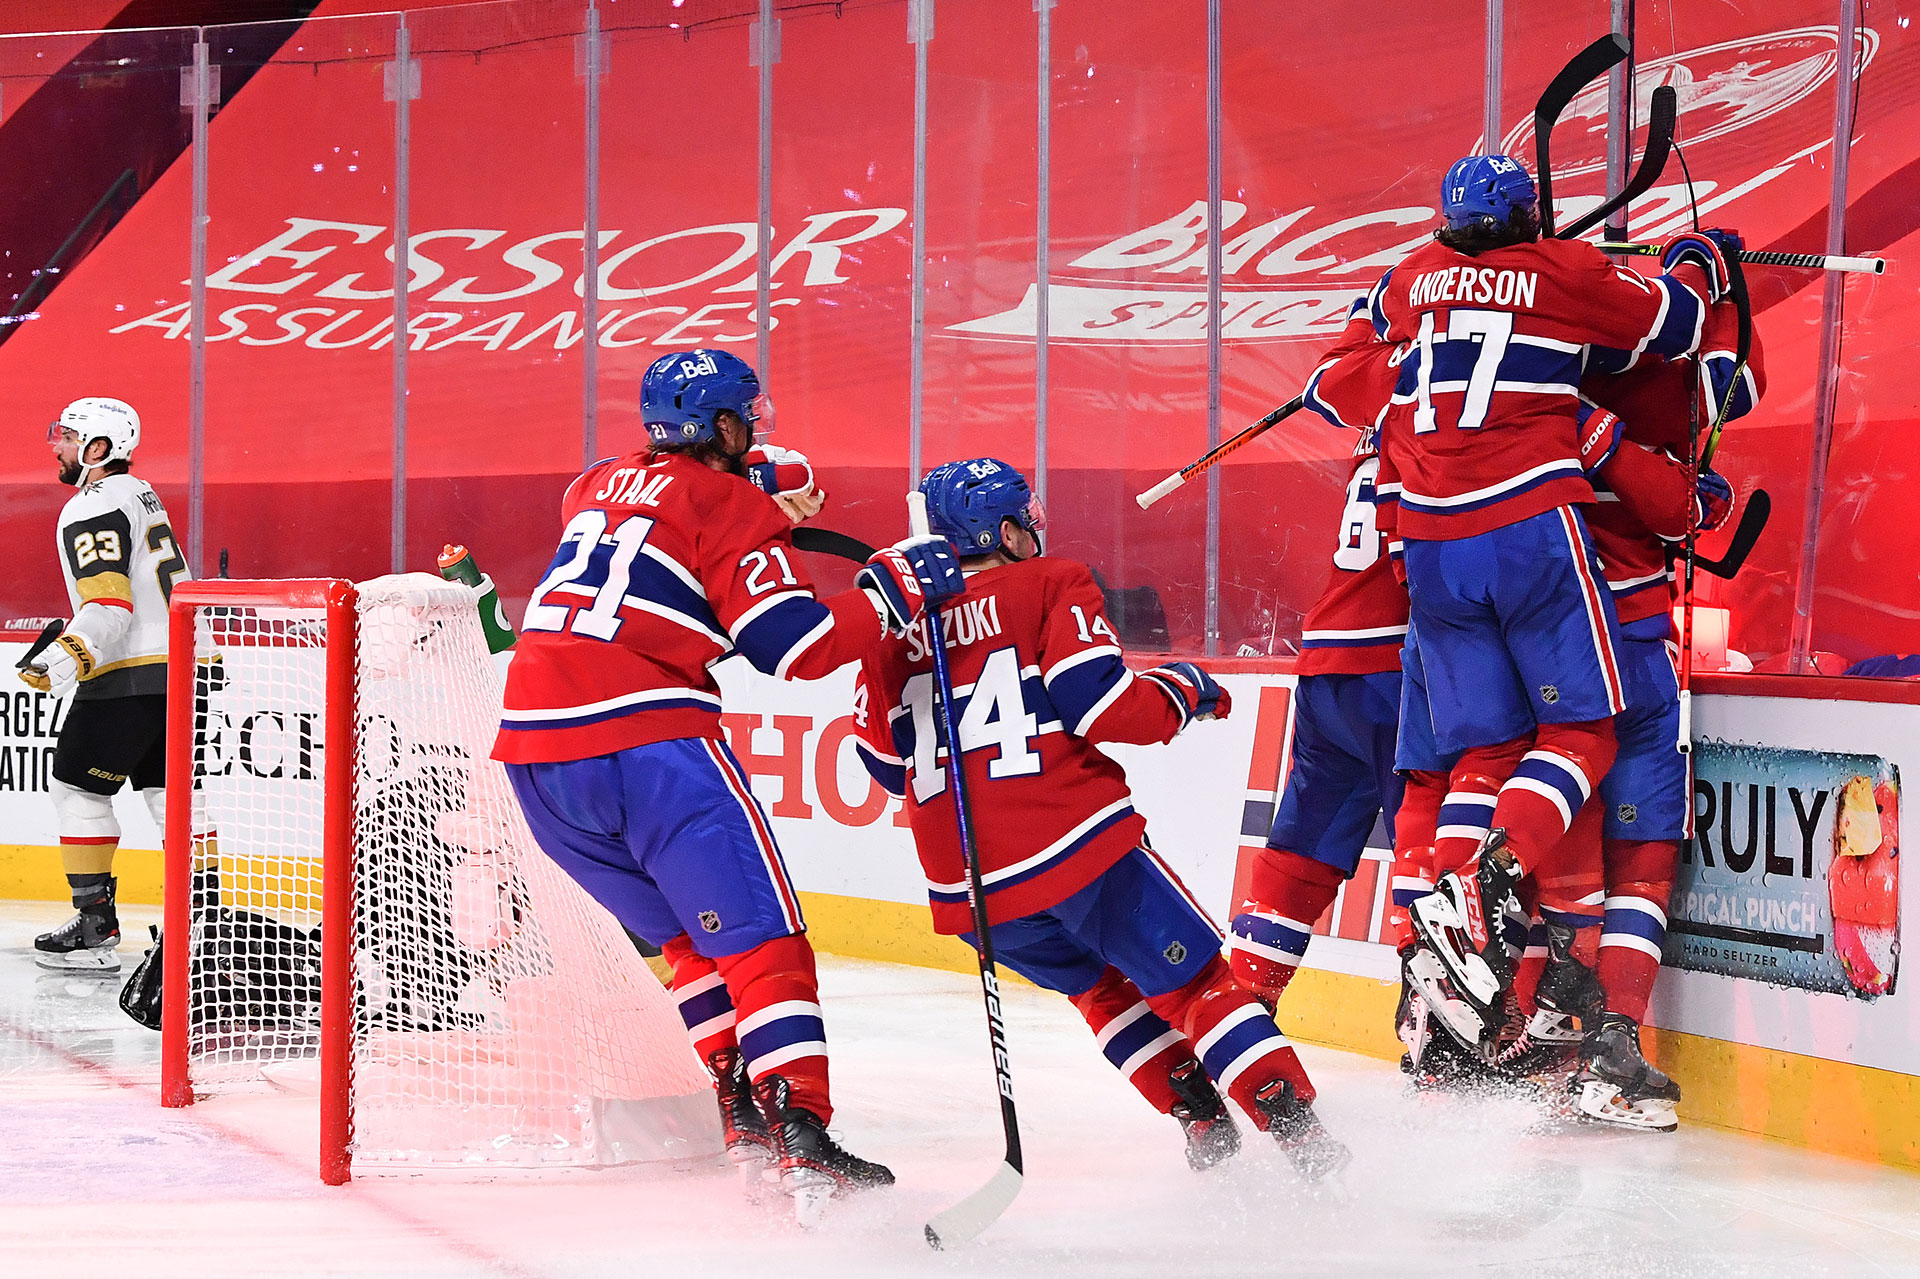 Artturi Lehkonen #62 of the Montreal Canadiens is congratulated by his teammates after scoring